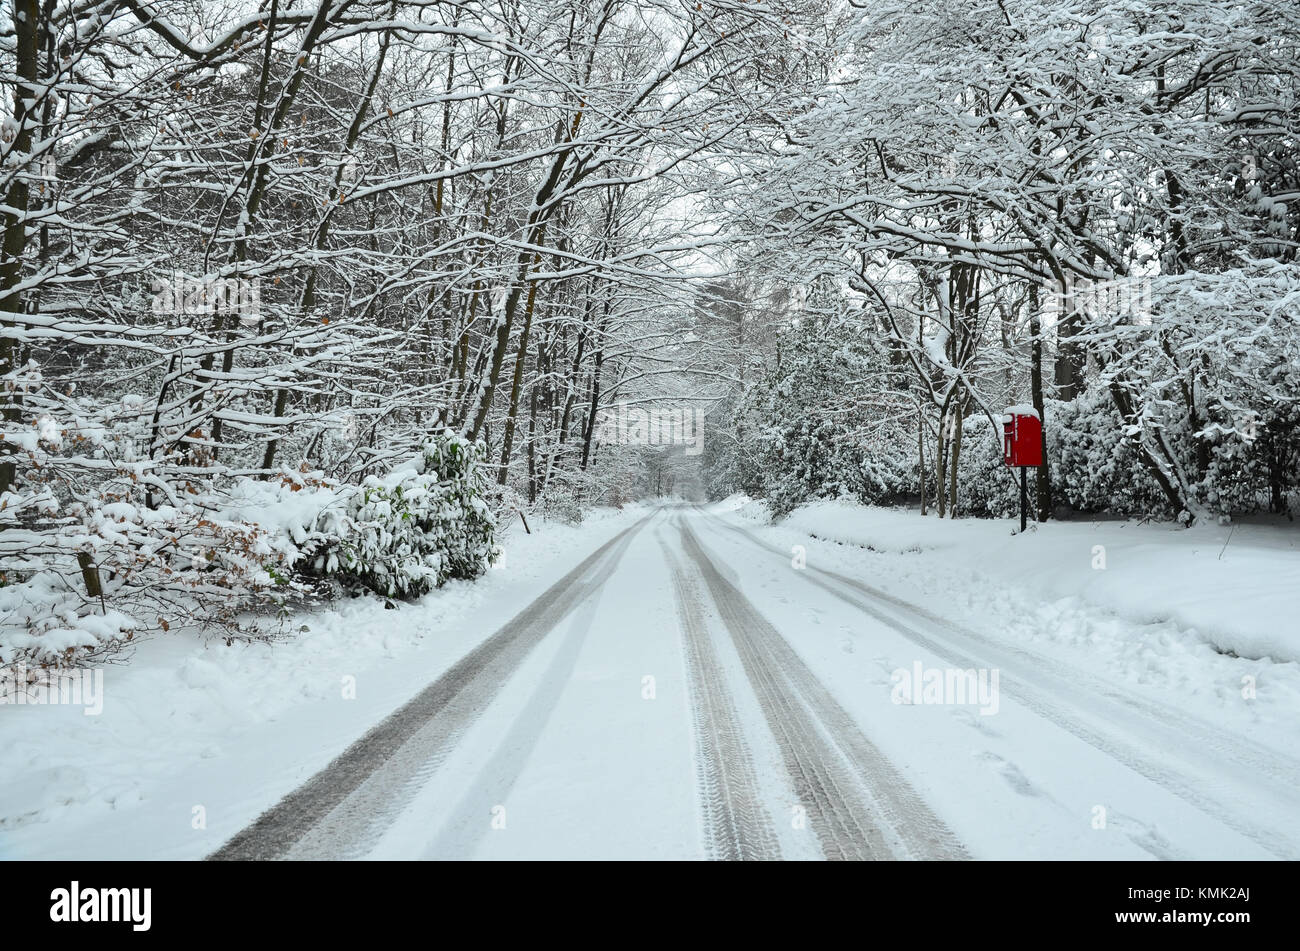 Picturesque wintry scene in Farnham, south of England with a snowy lane, car tracks and red post box Stock Photo